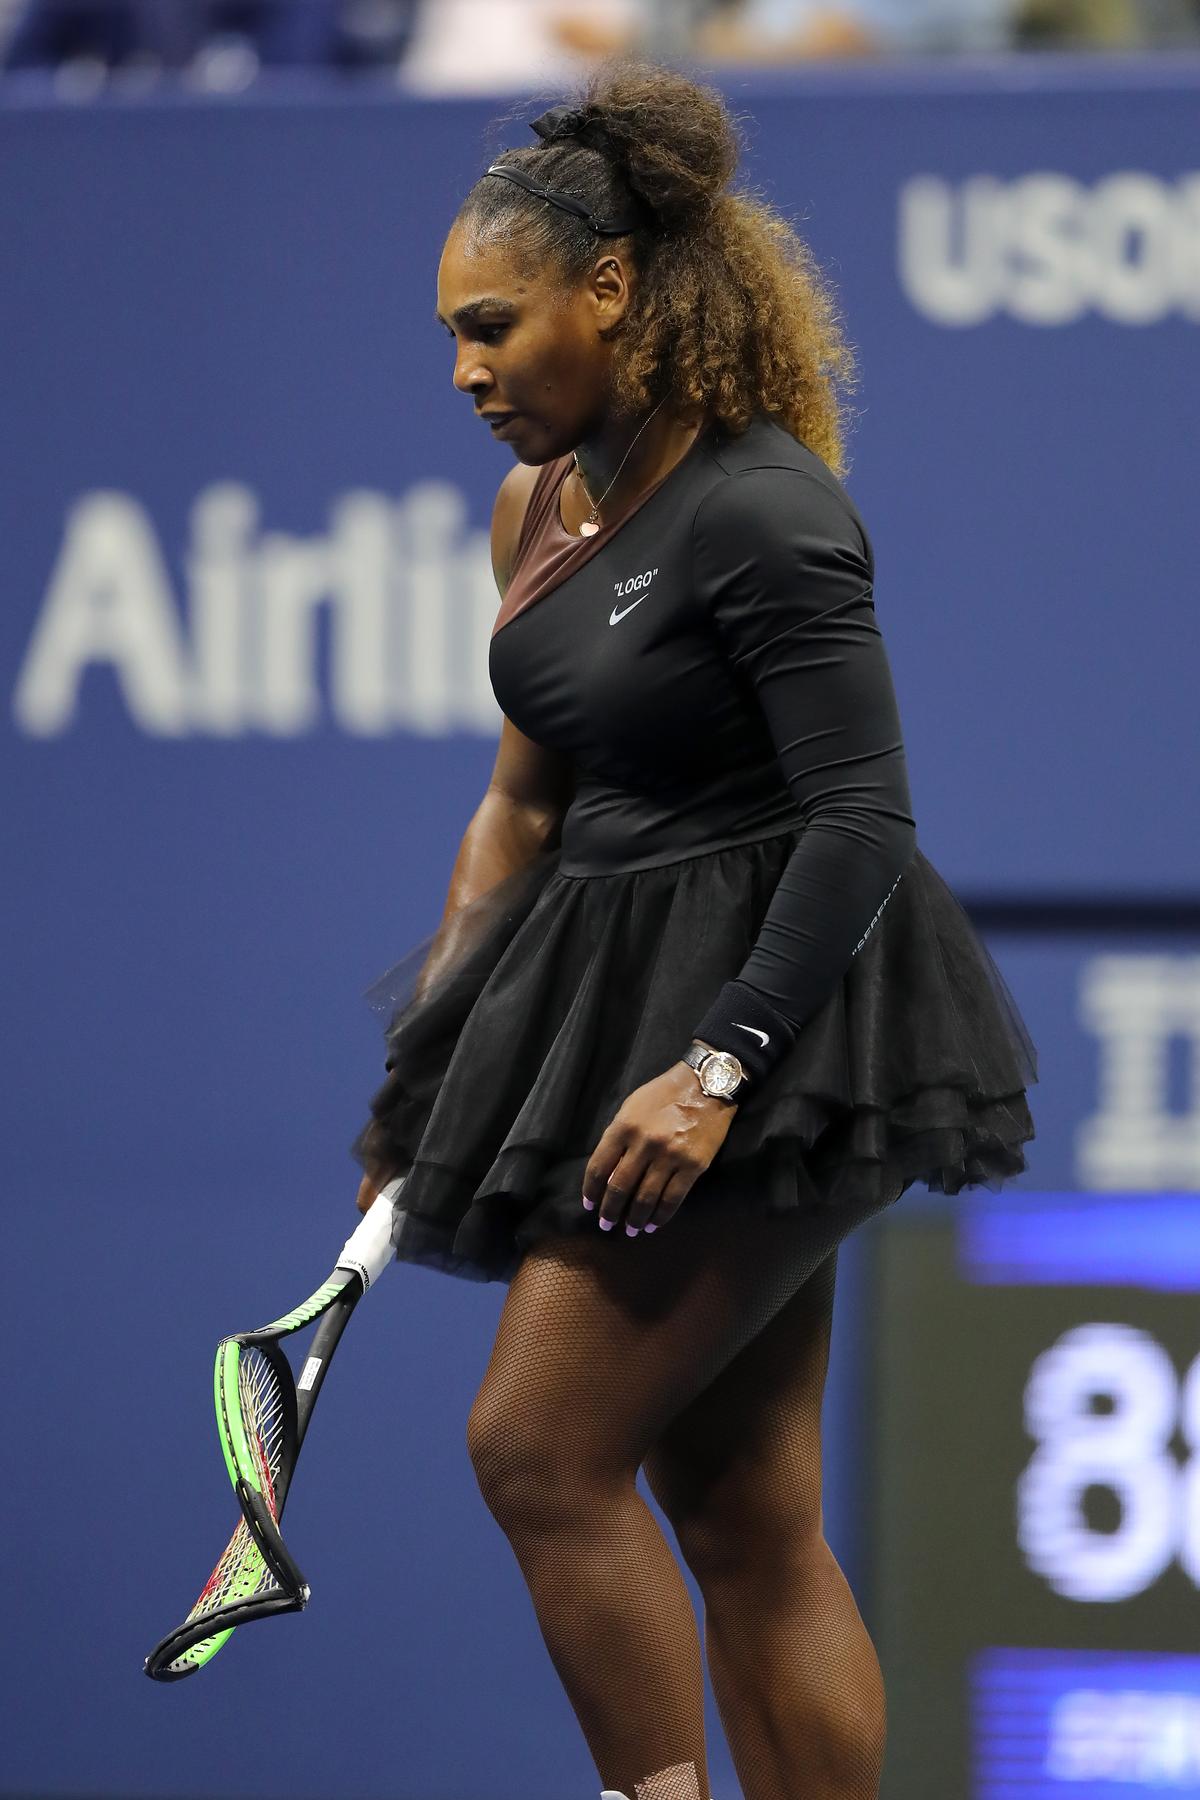 Serena Williams of the United States returns to her chair after smashing her racket during her Women's Singles finals match against Naomi Osaka of Japan during the 2018 US Open in New York City on Sept. 8, 2018. (Elsa/Getty Images)